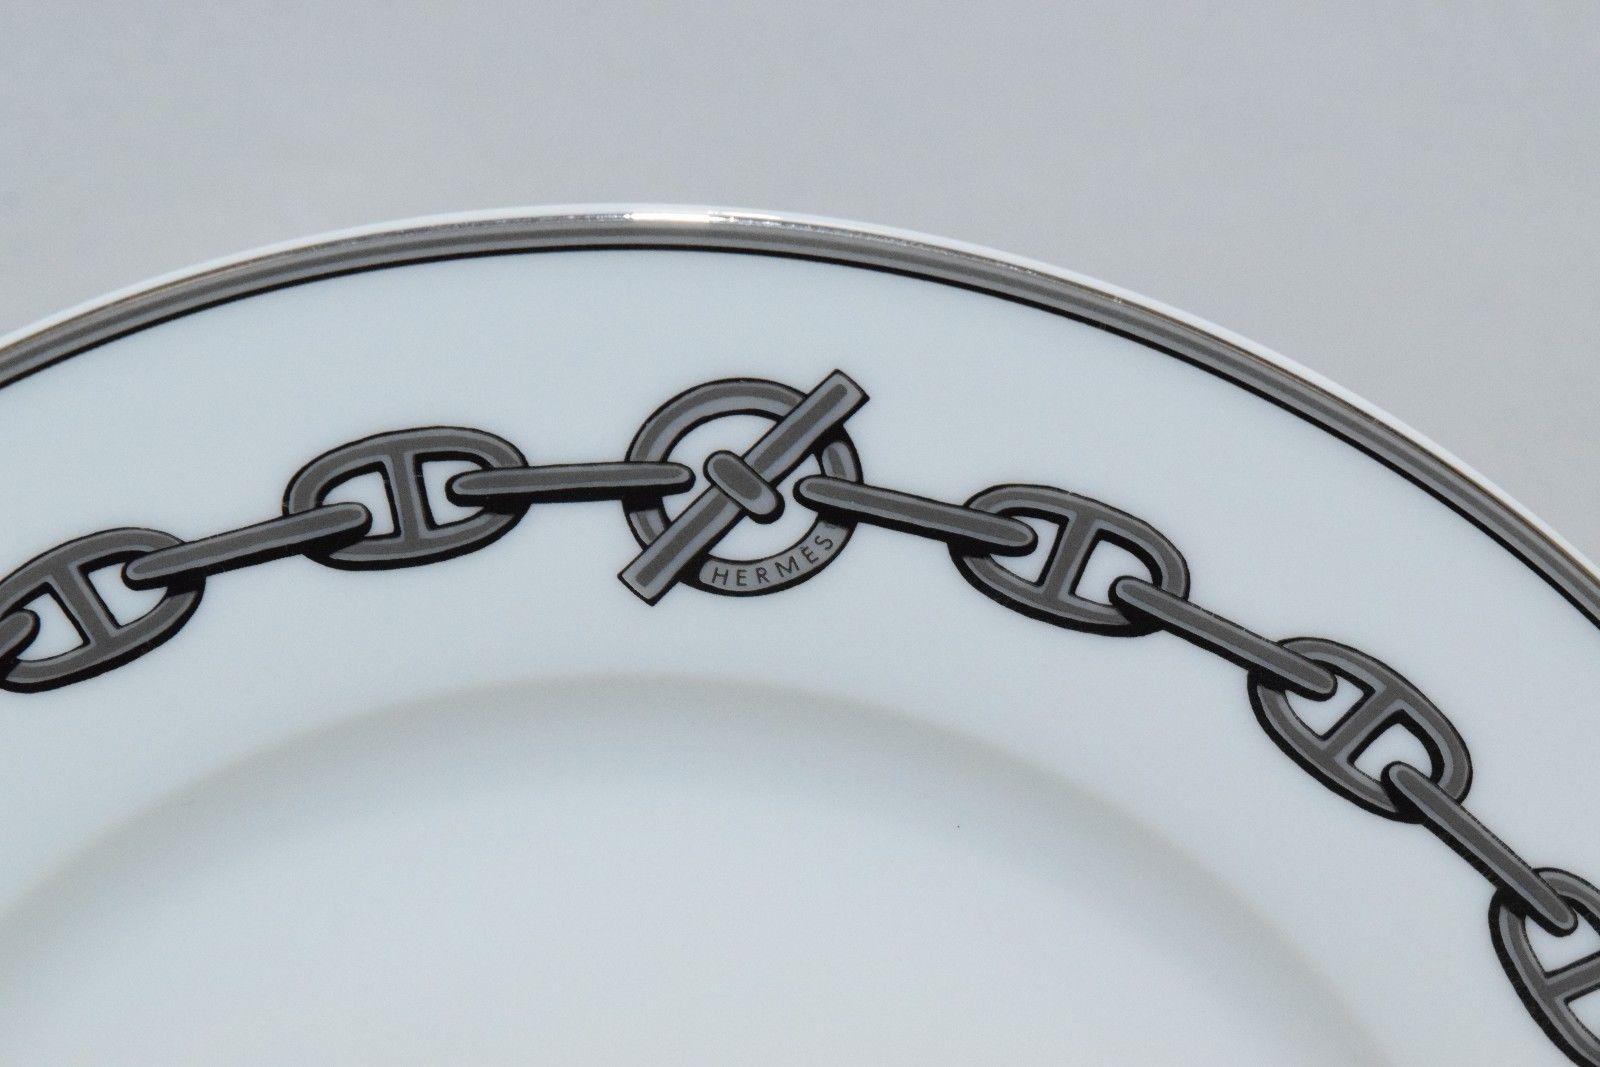 A set of 12 (twelve) place settings in the Chaine D'Ancre pattern in gray by Hermes. Porcelain. Signed. Made in France, produced from 1997-2017.

One of Hermès most coveted patterns. Featuring the signature chain link border against pristine